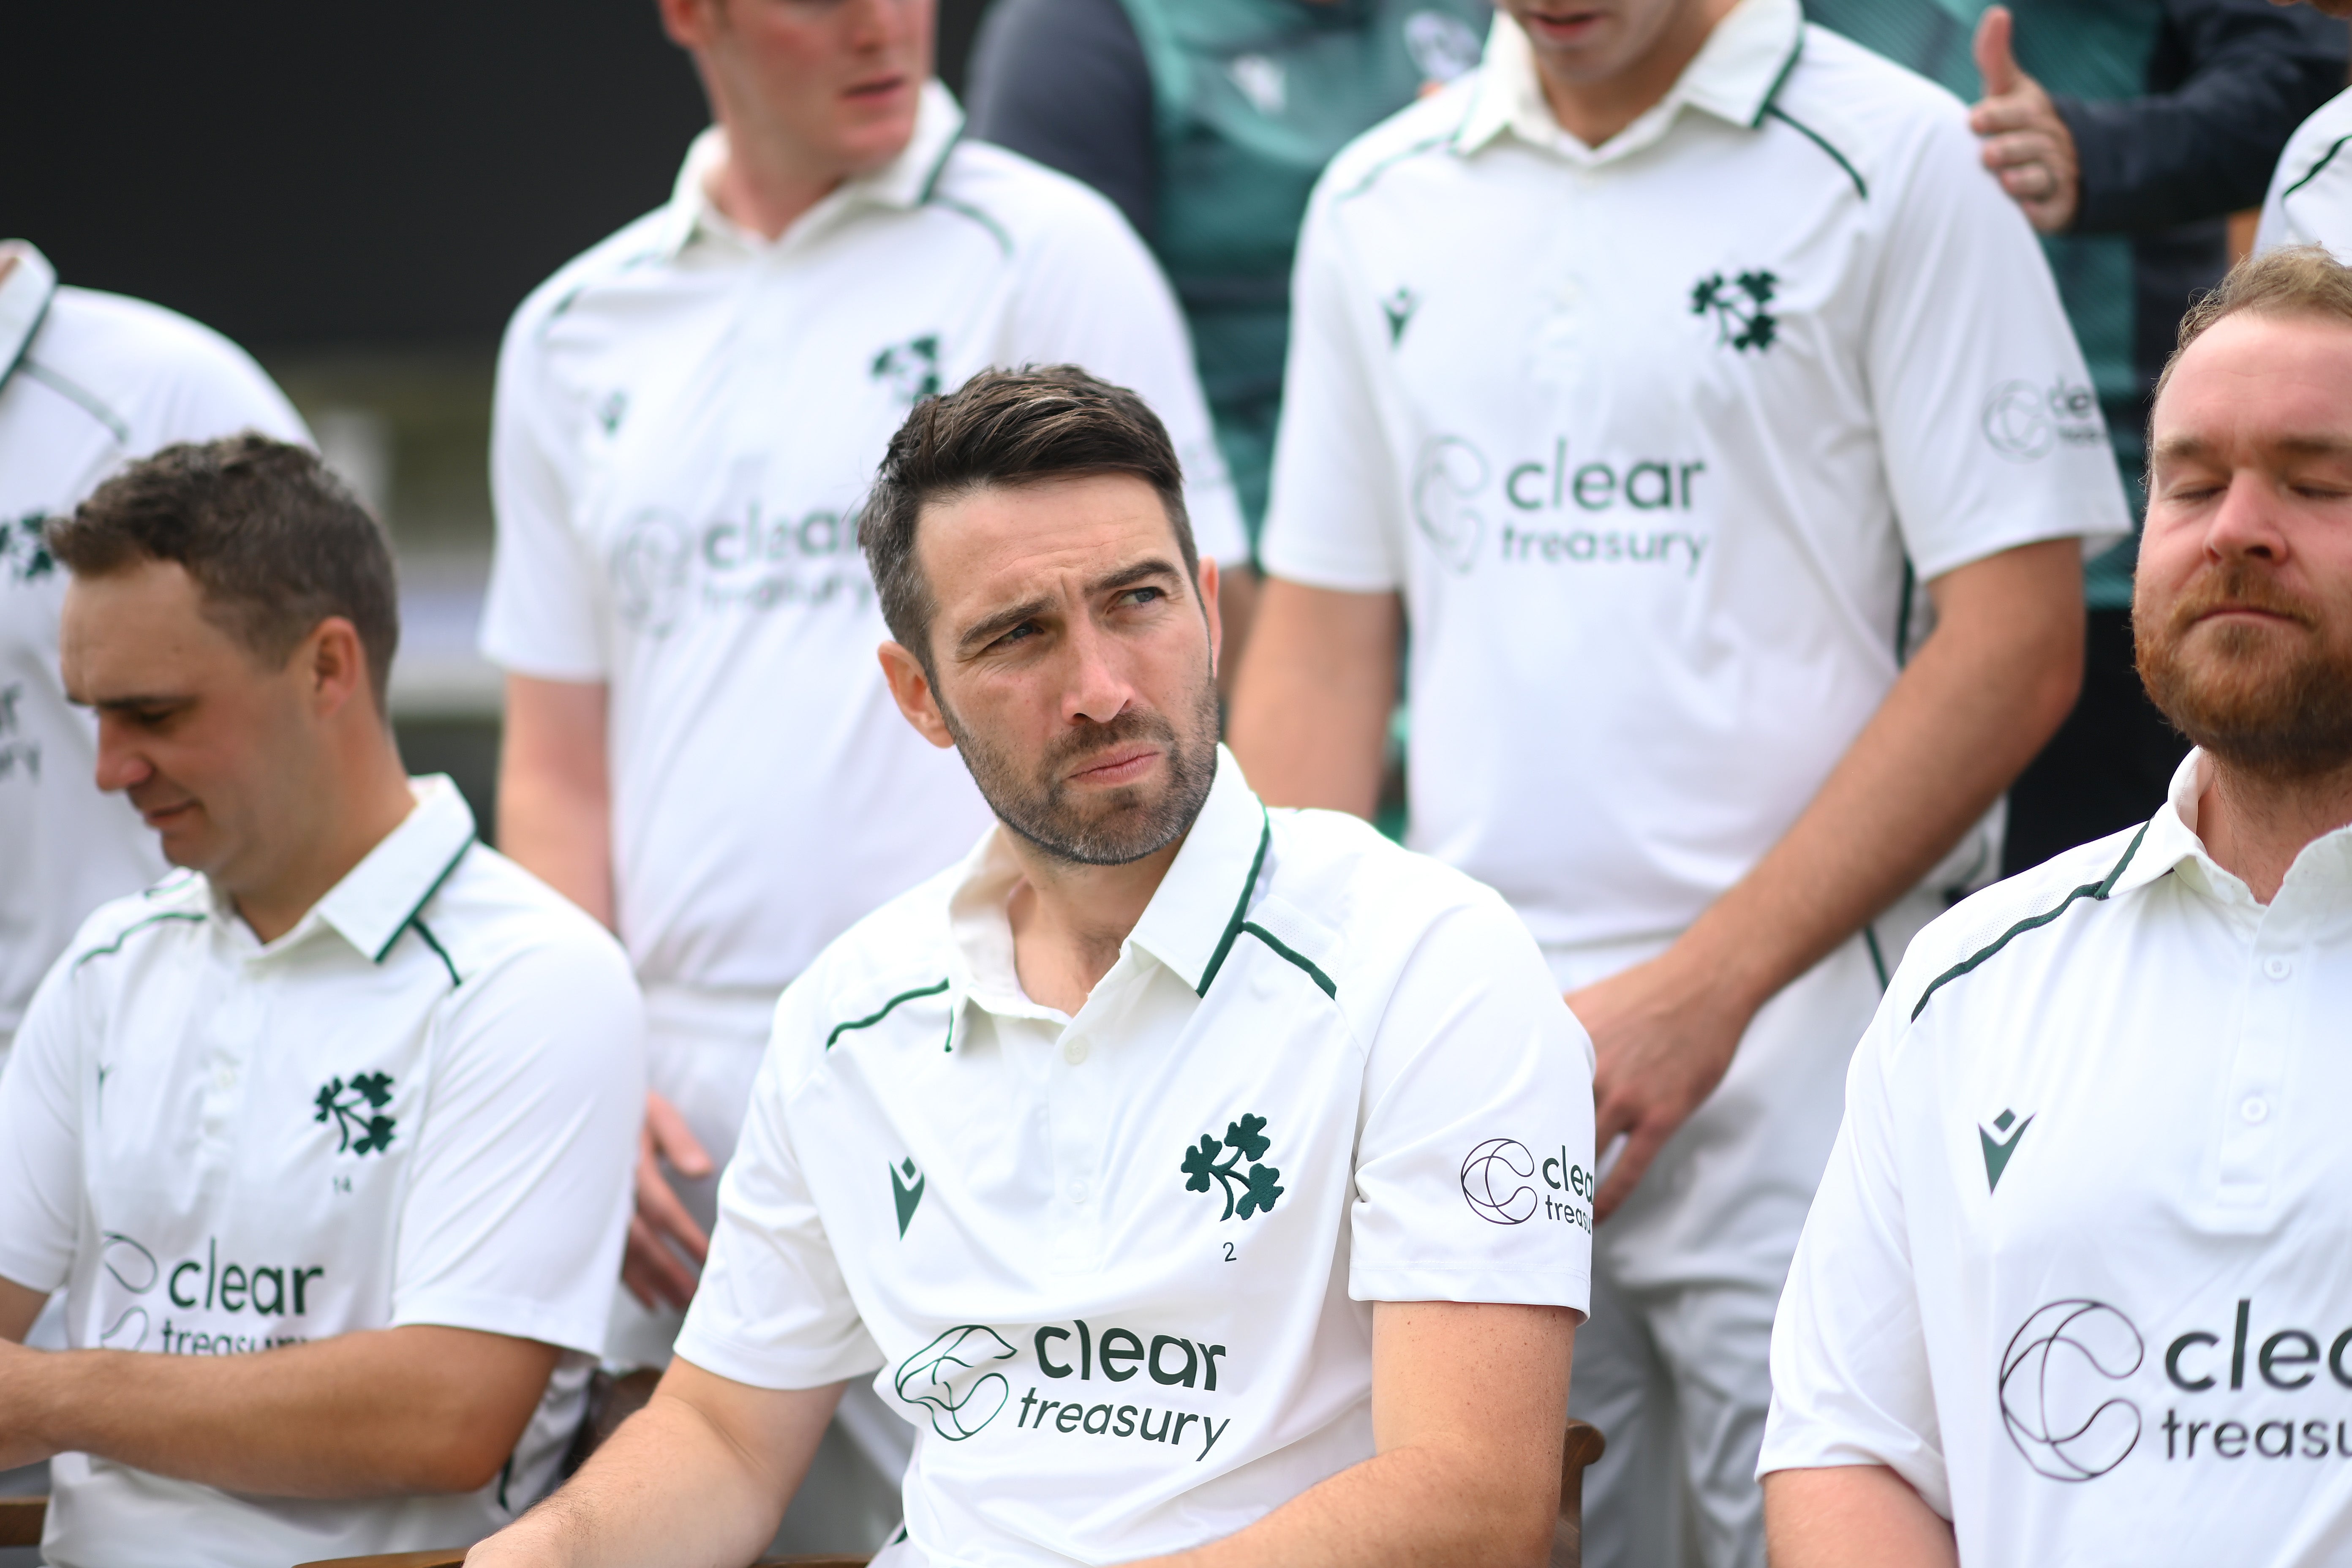 Ireland recorded their first Test victory against Afghanistan